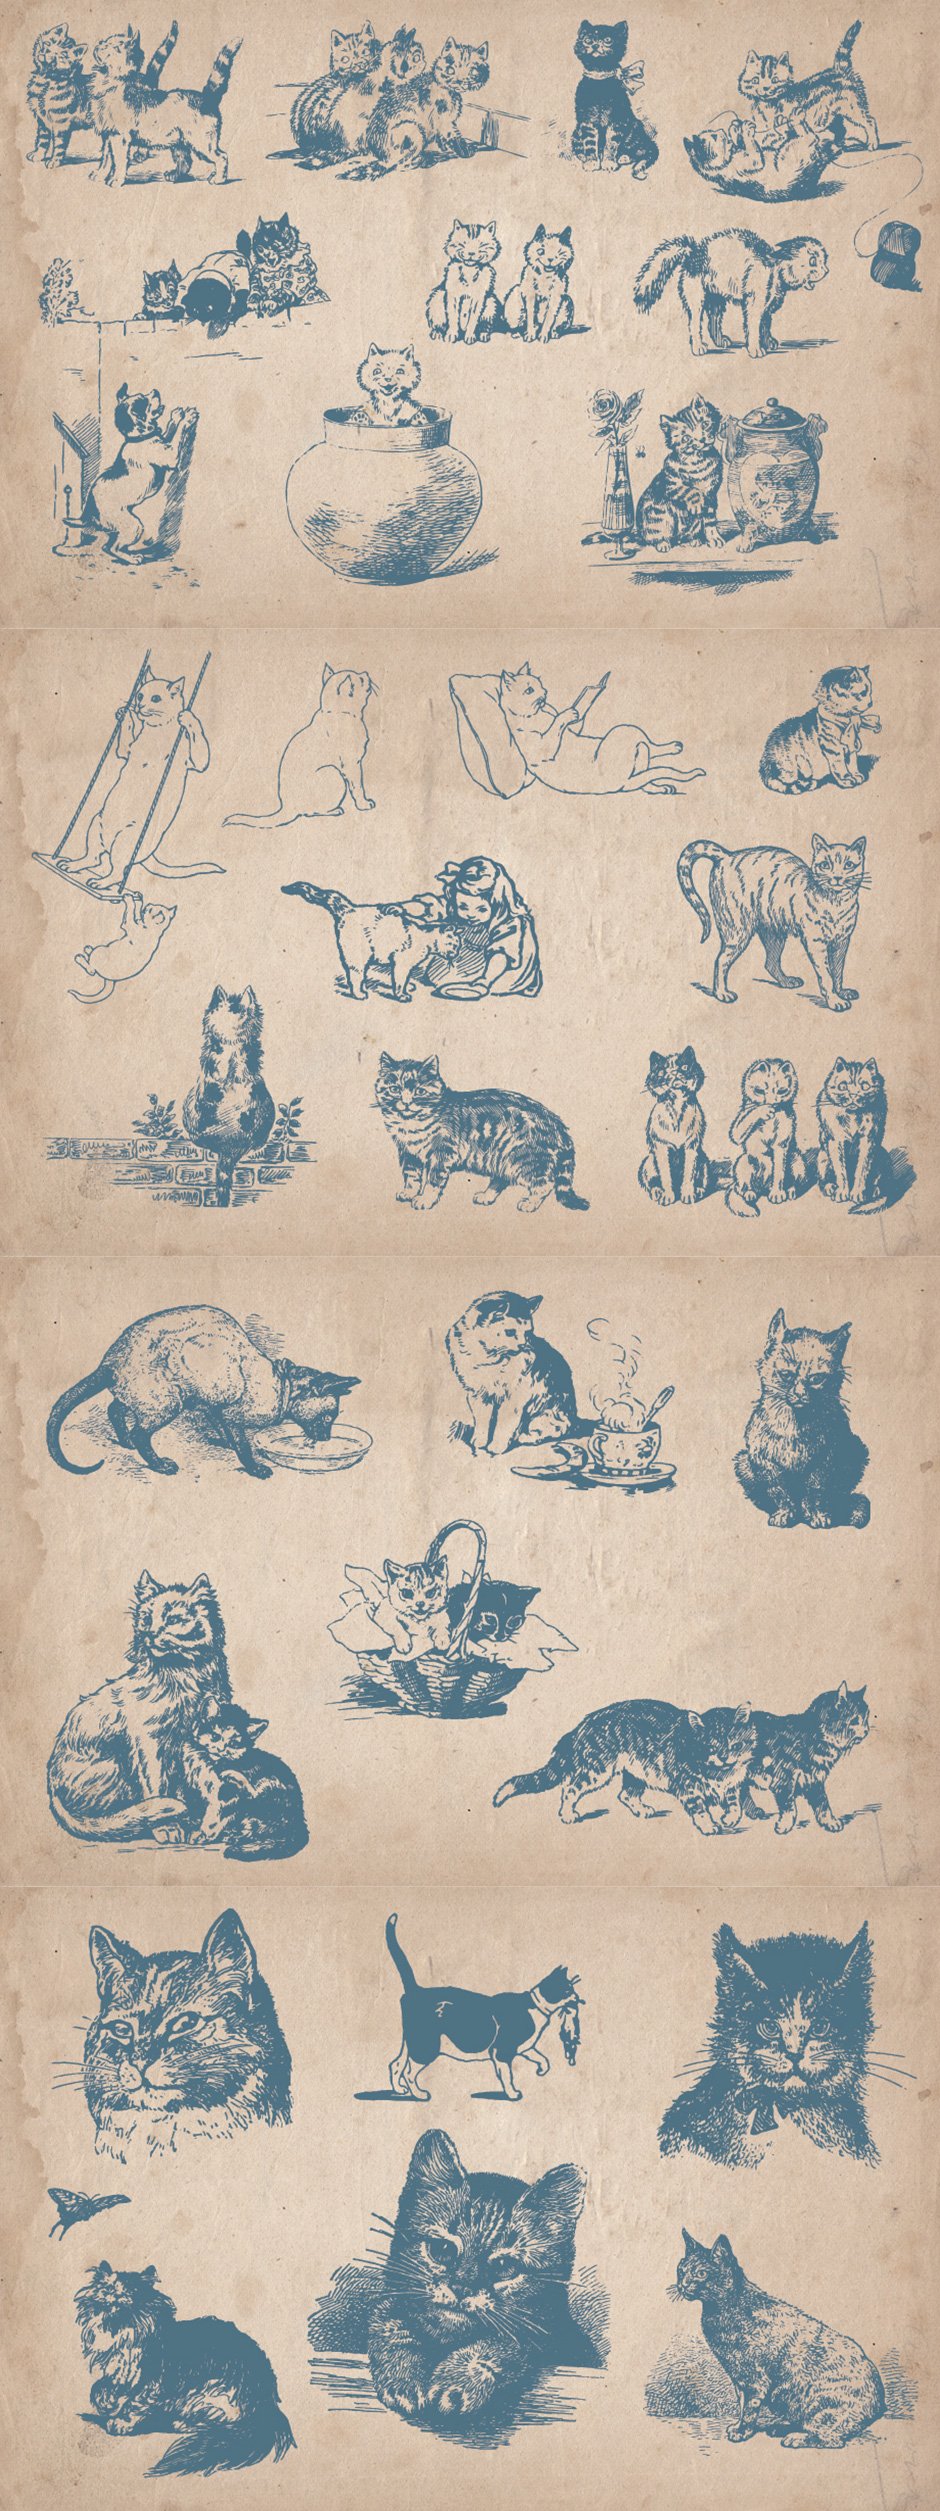 31 Hand-drawn Cats and Kittens